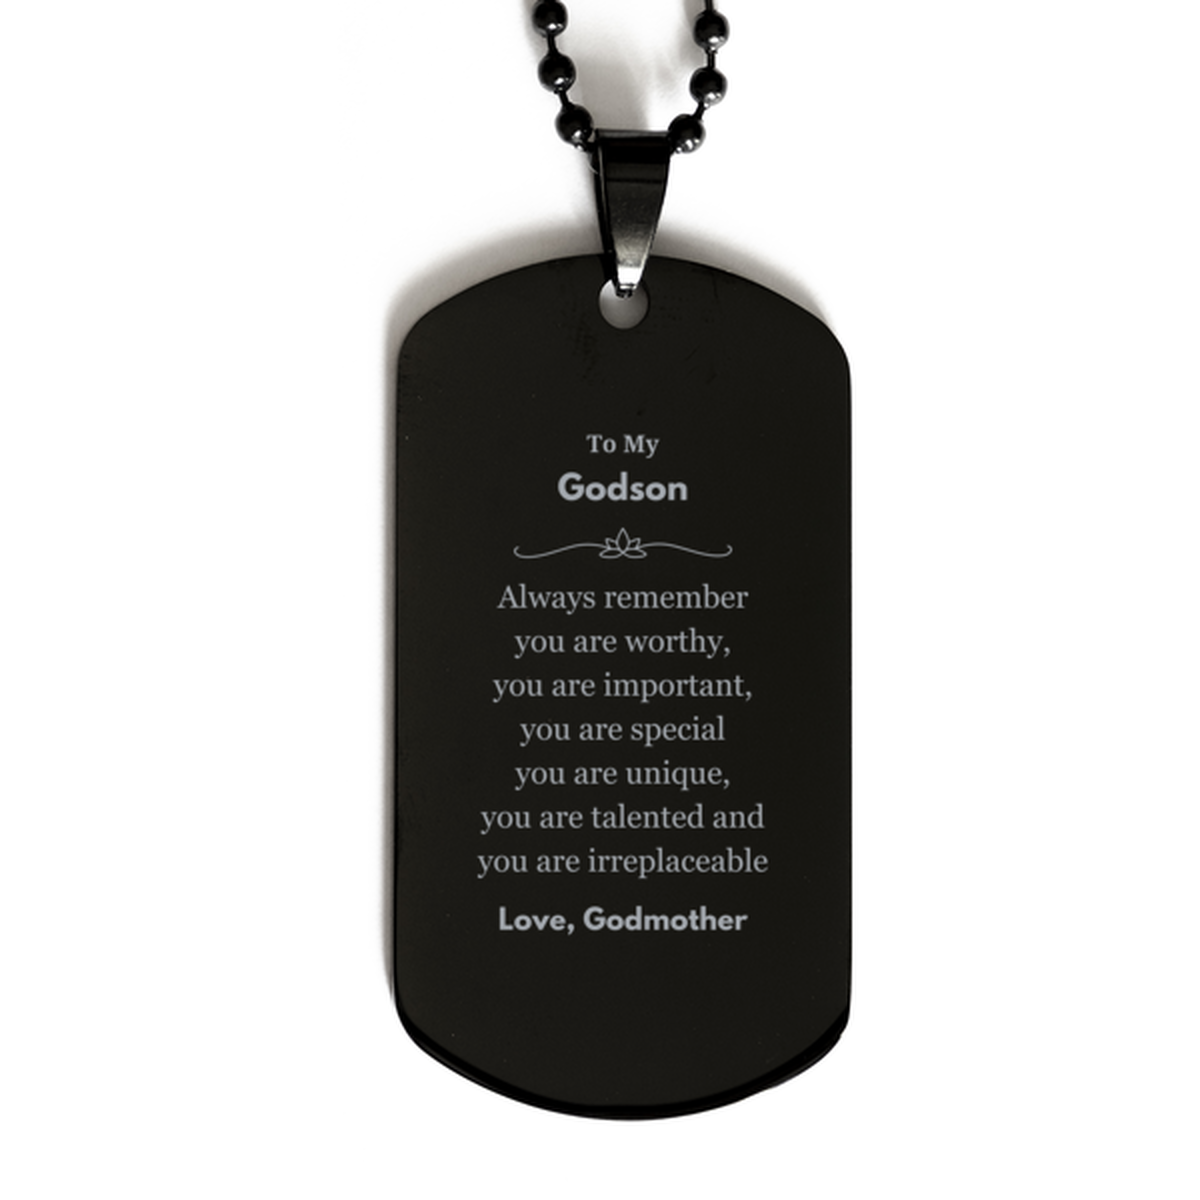 Godson Birthday Gifts from Godmother, Inspirational Black Dog Tag for Godson Christmas Graduation Gifts for Godson Always remember you are worthy, you are important. Love, Godmother